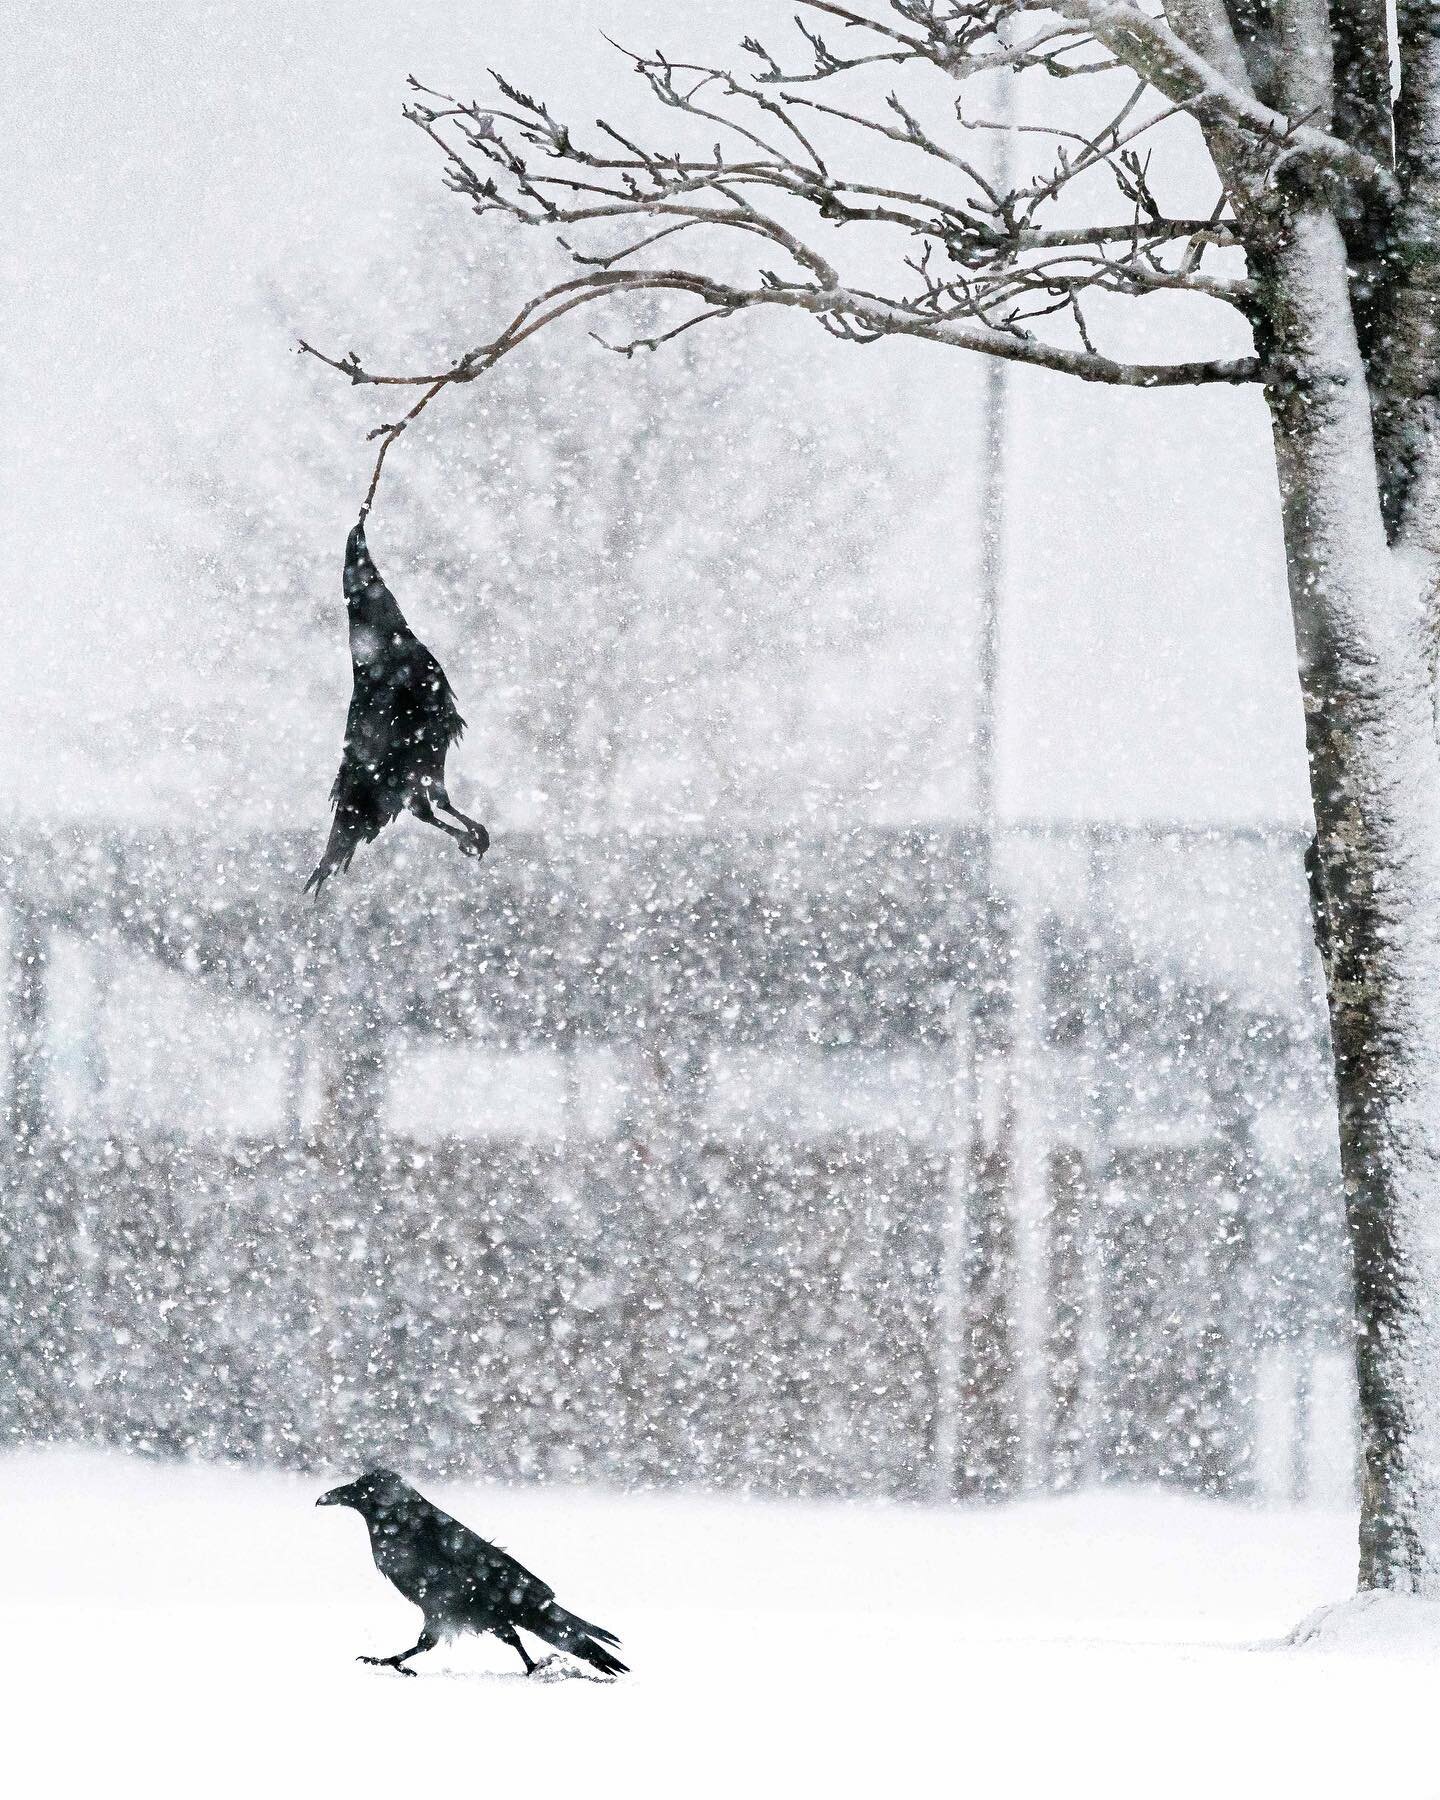 Everybody likes to play in the snow one way or another. Yesterday we watched as these two ravens kept hanging from this thin branch.  Either upside down with leg, or by the tip of their beaks. Only to then let go and plop down into the snow.  Shake i